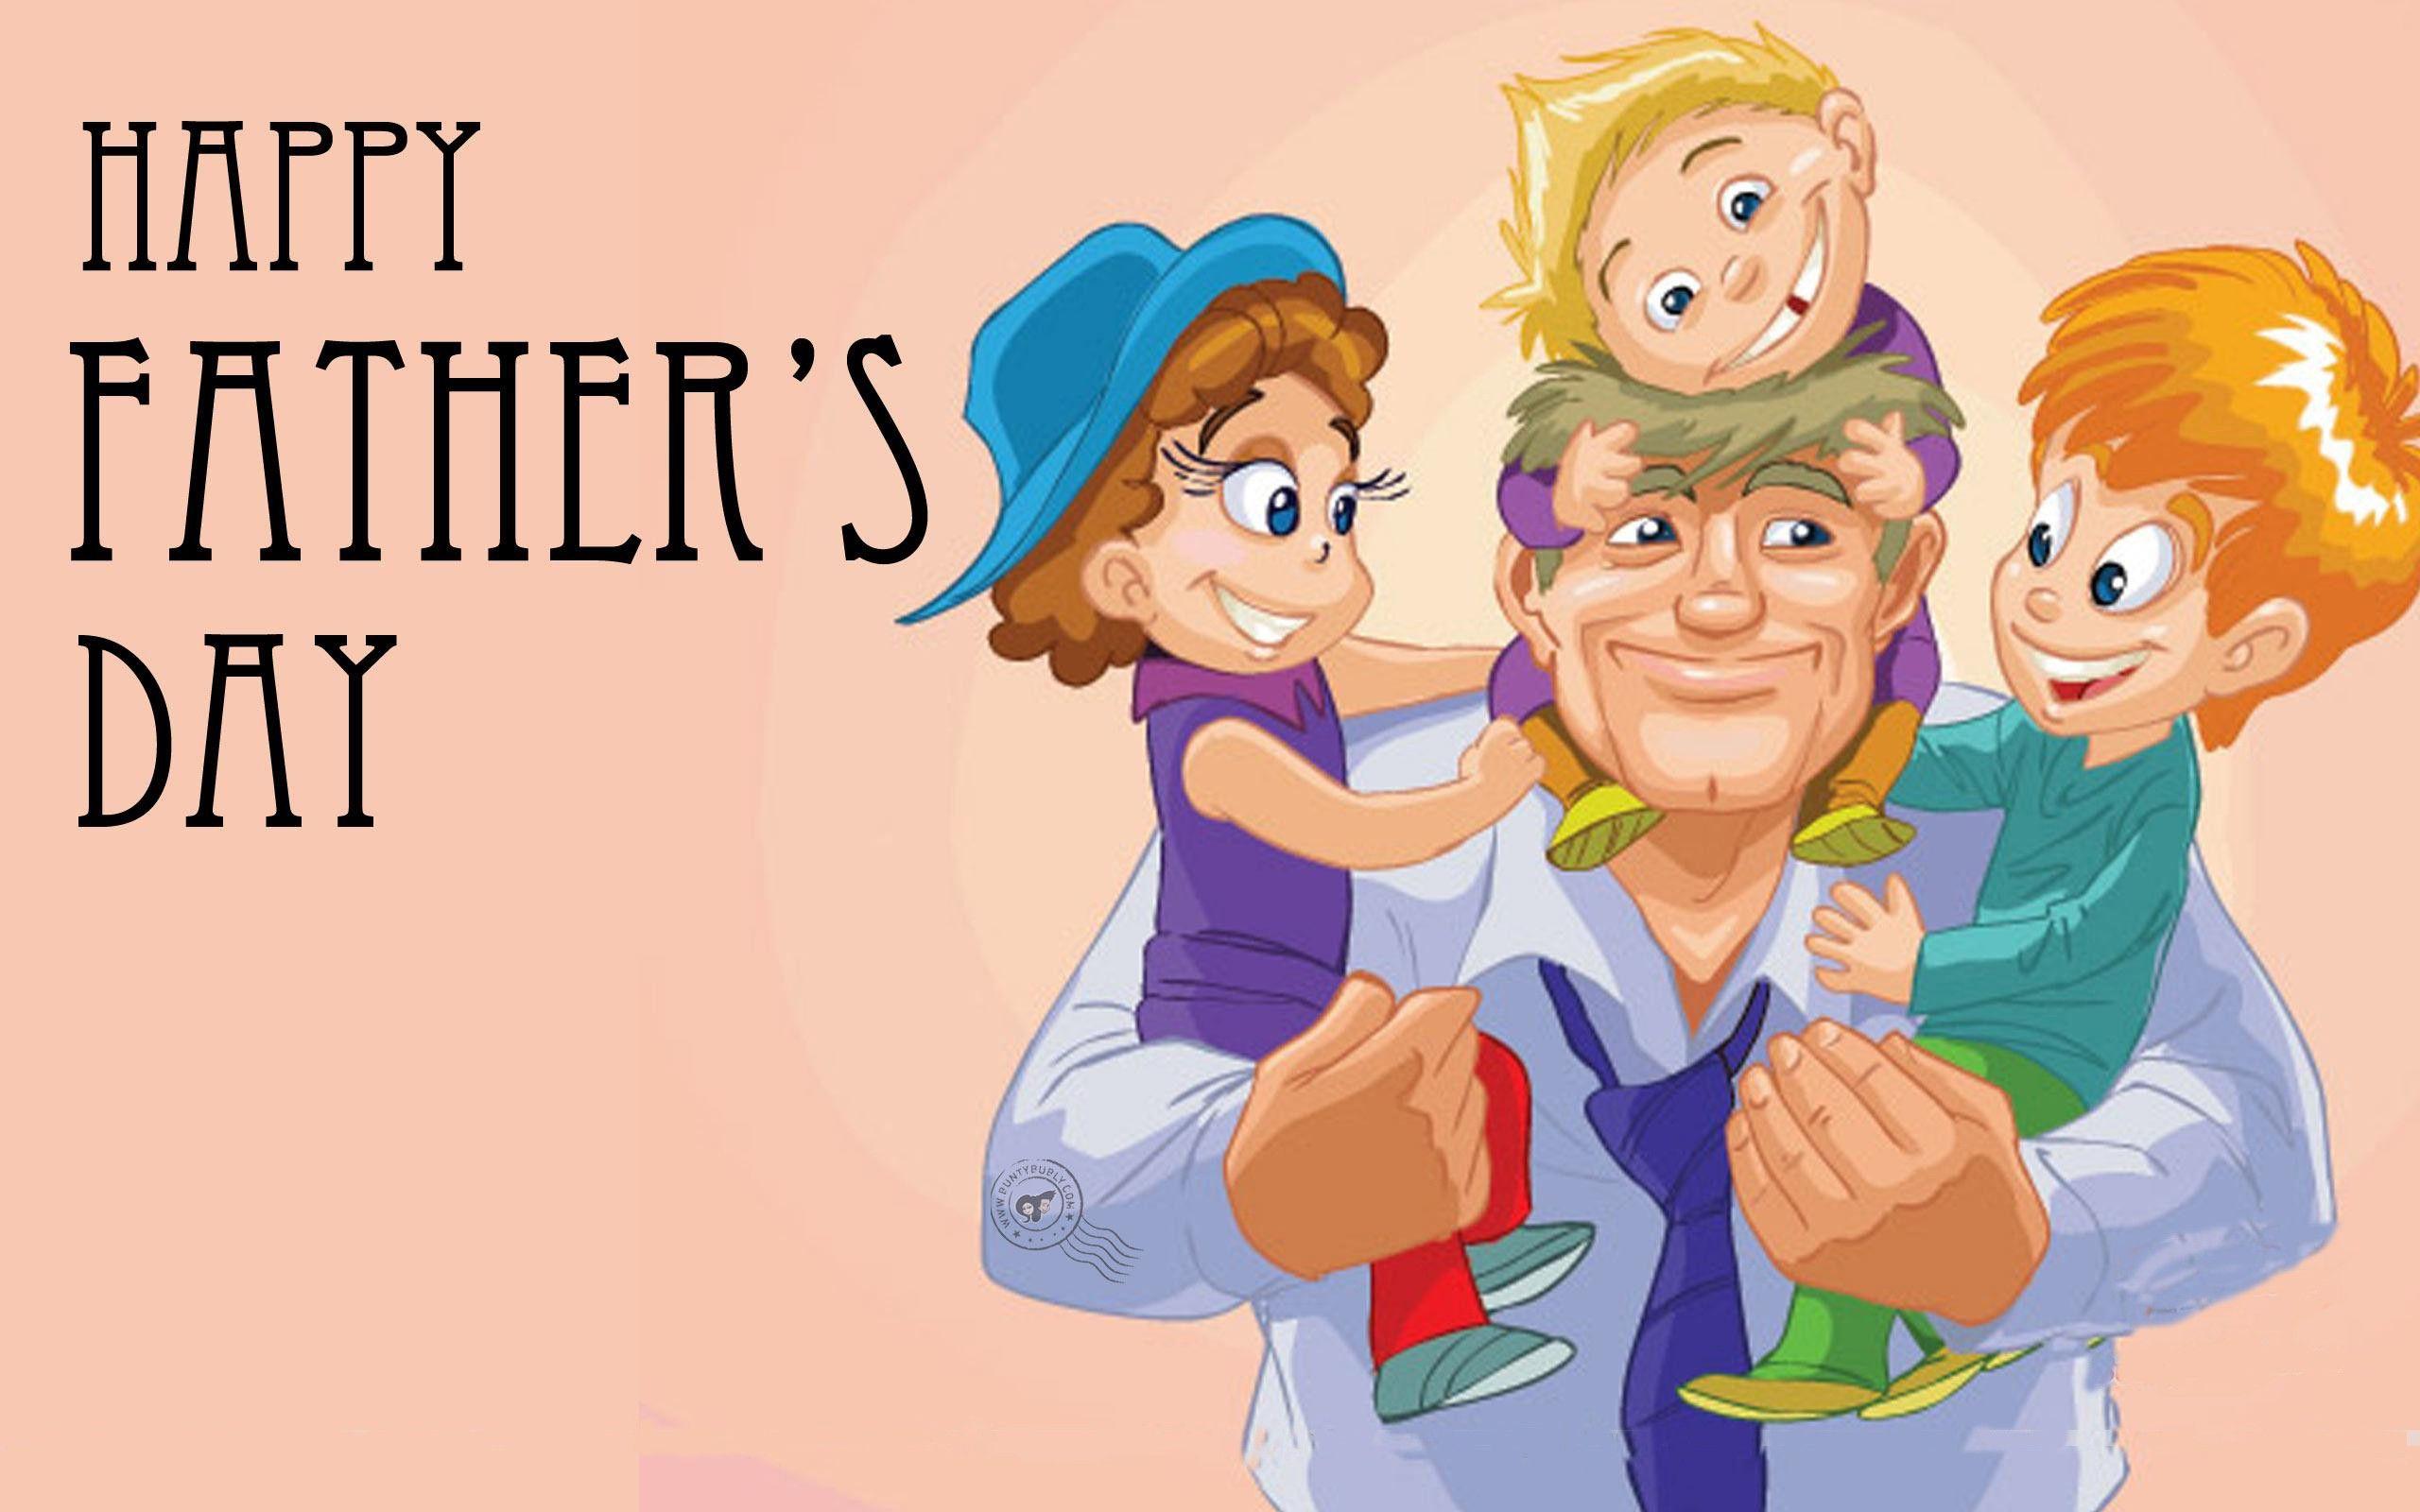 Happy Father's Day Wallpaper HD. Free Image, Picture and